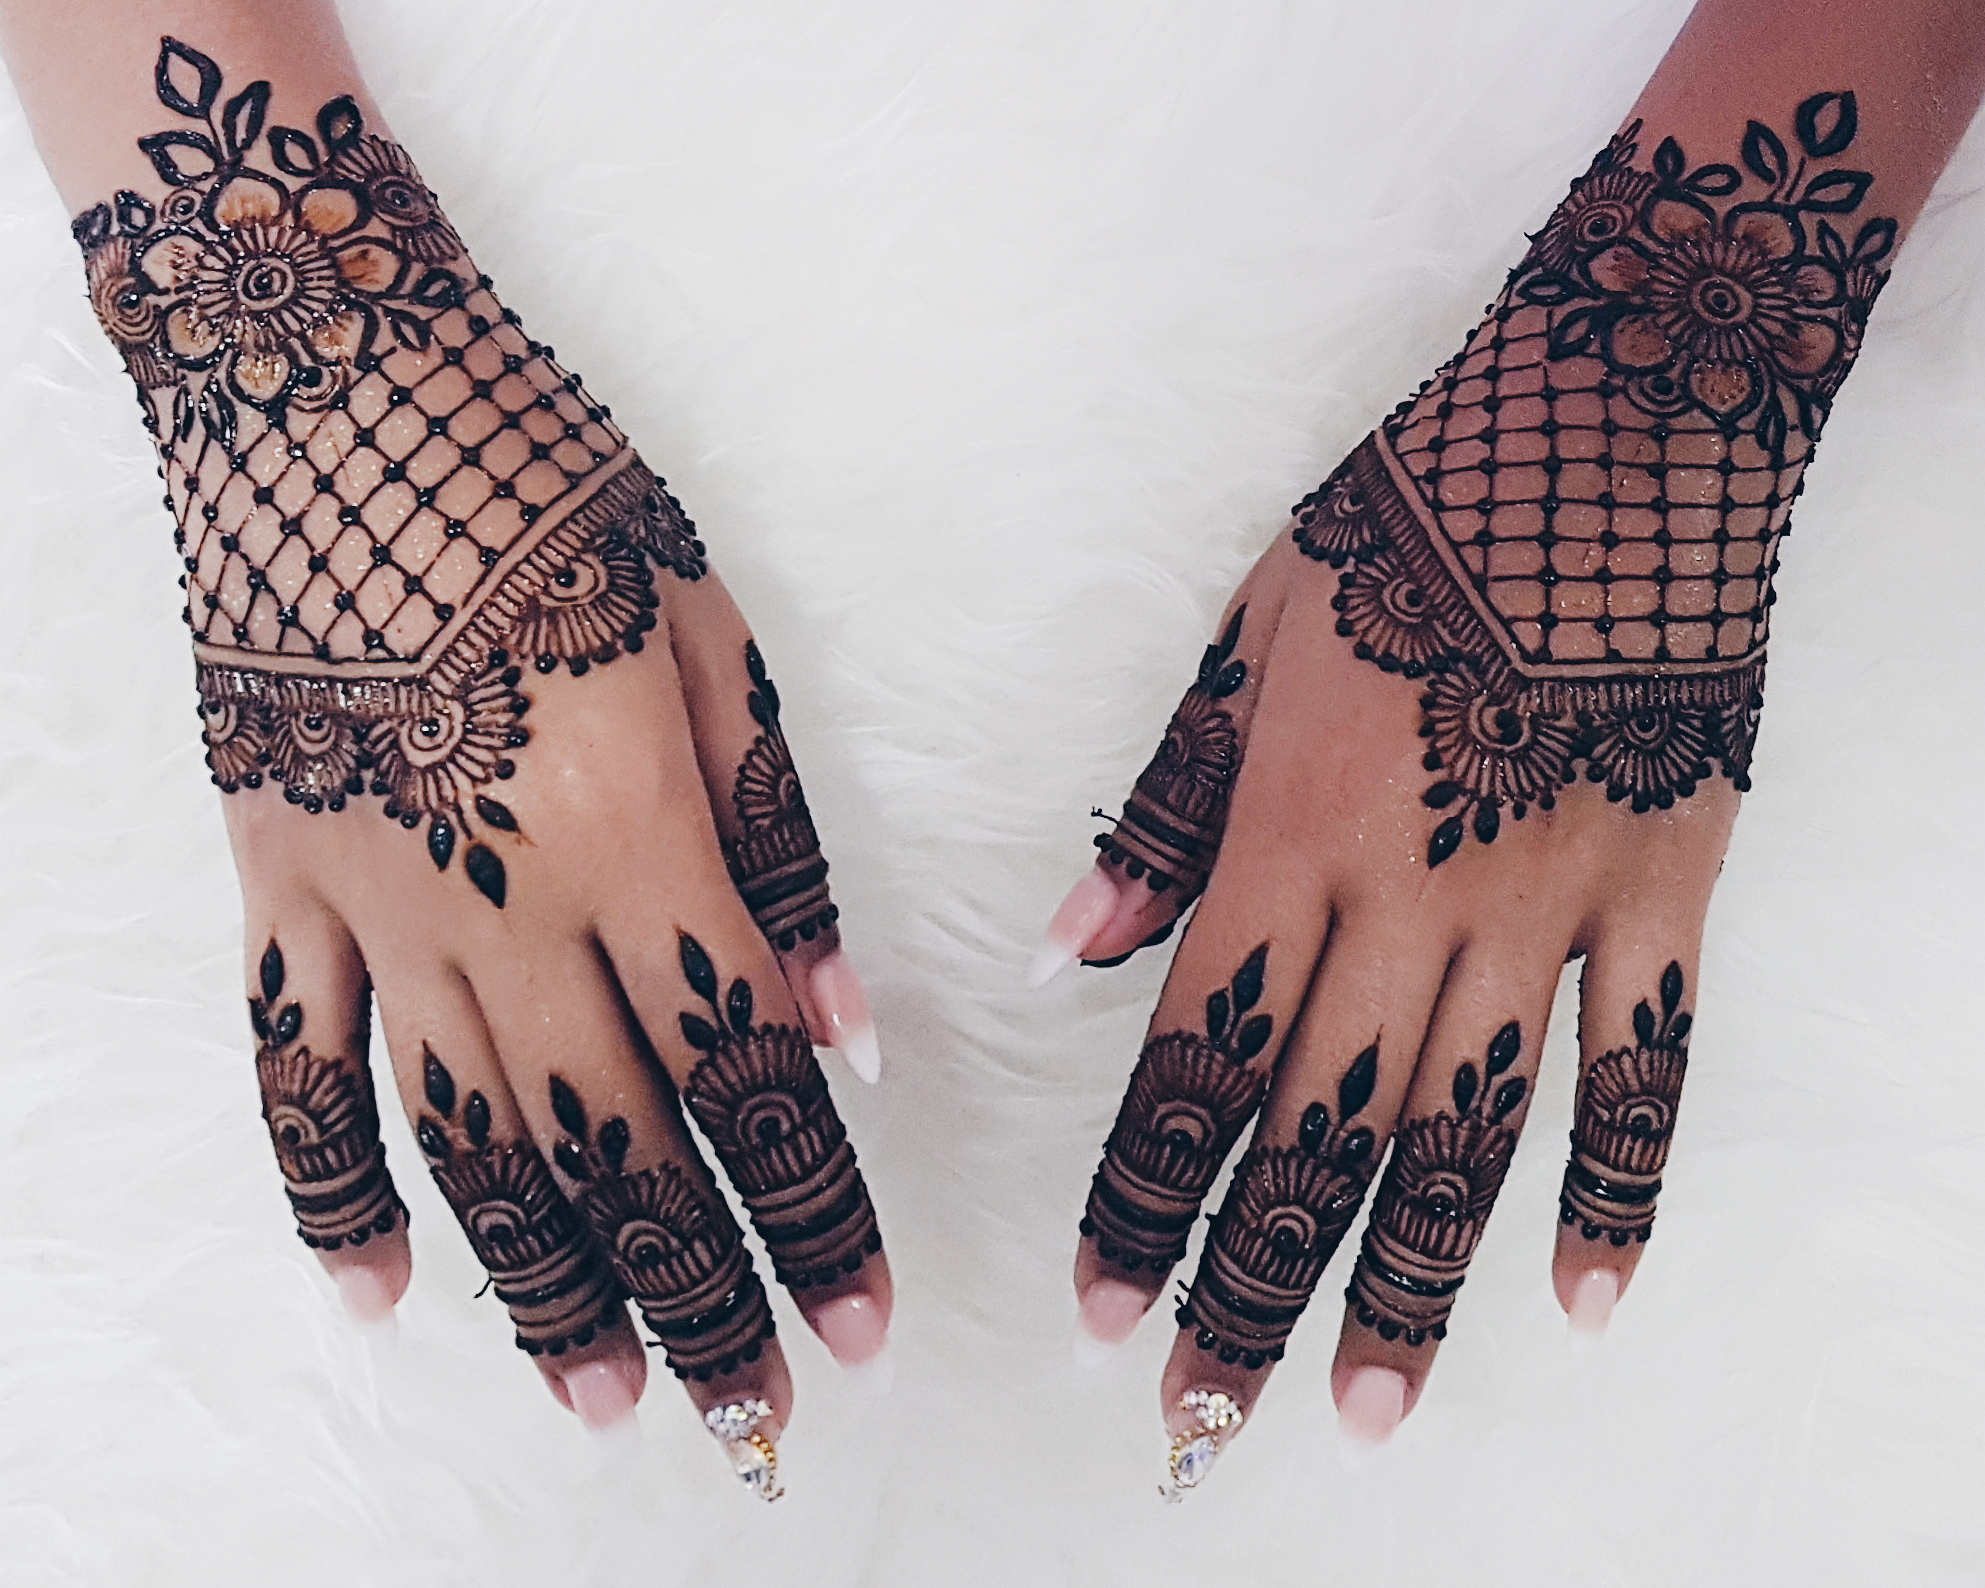 Will mehndi on my nails cause an issue in the NEET? - Quora